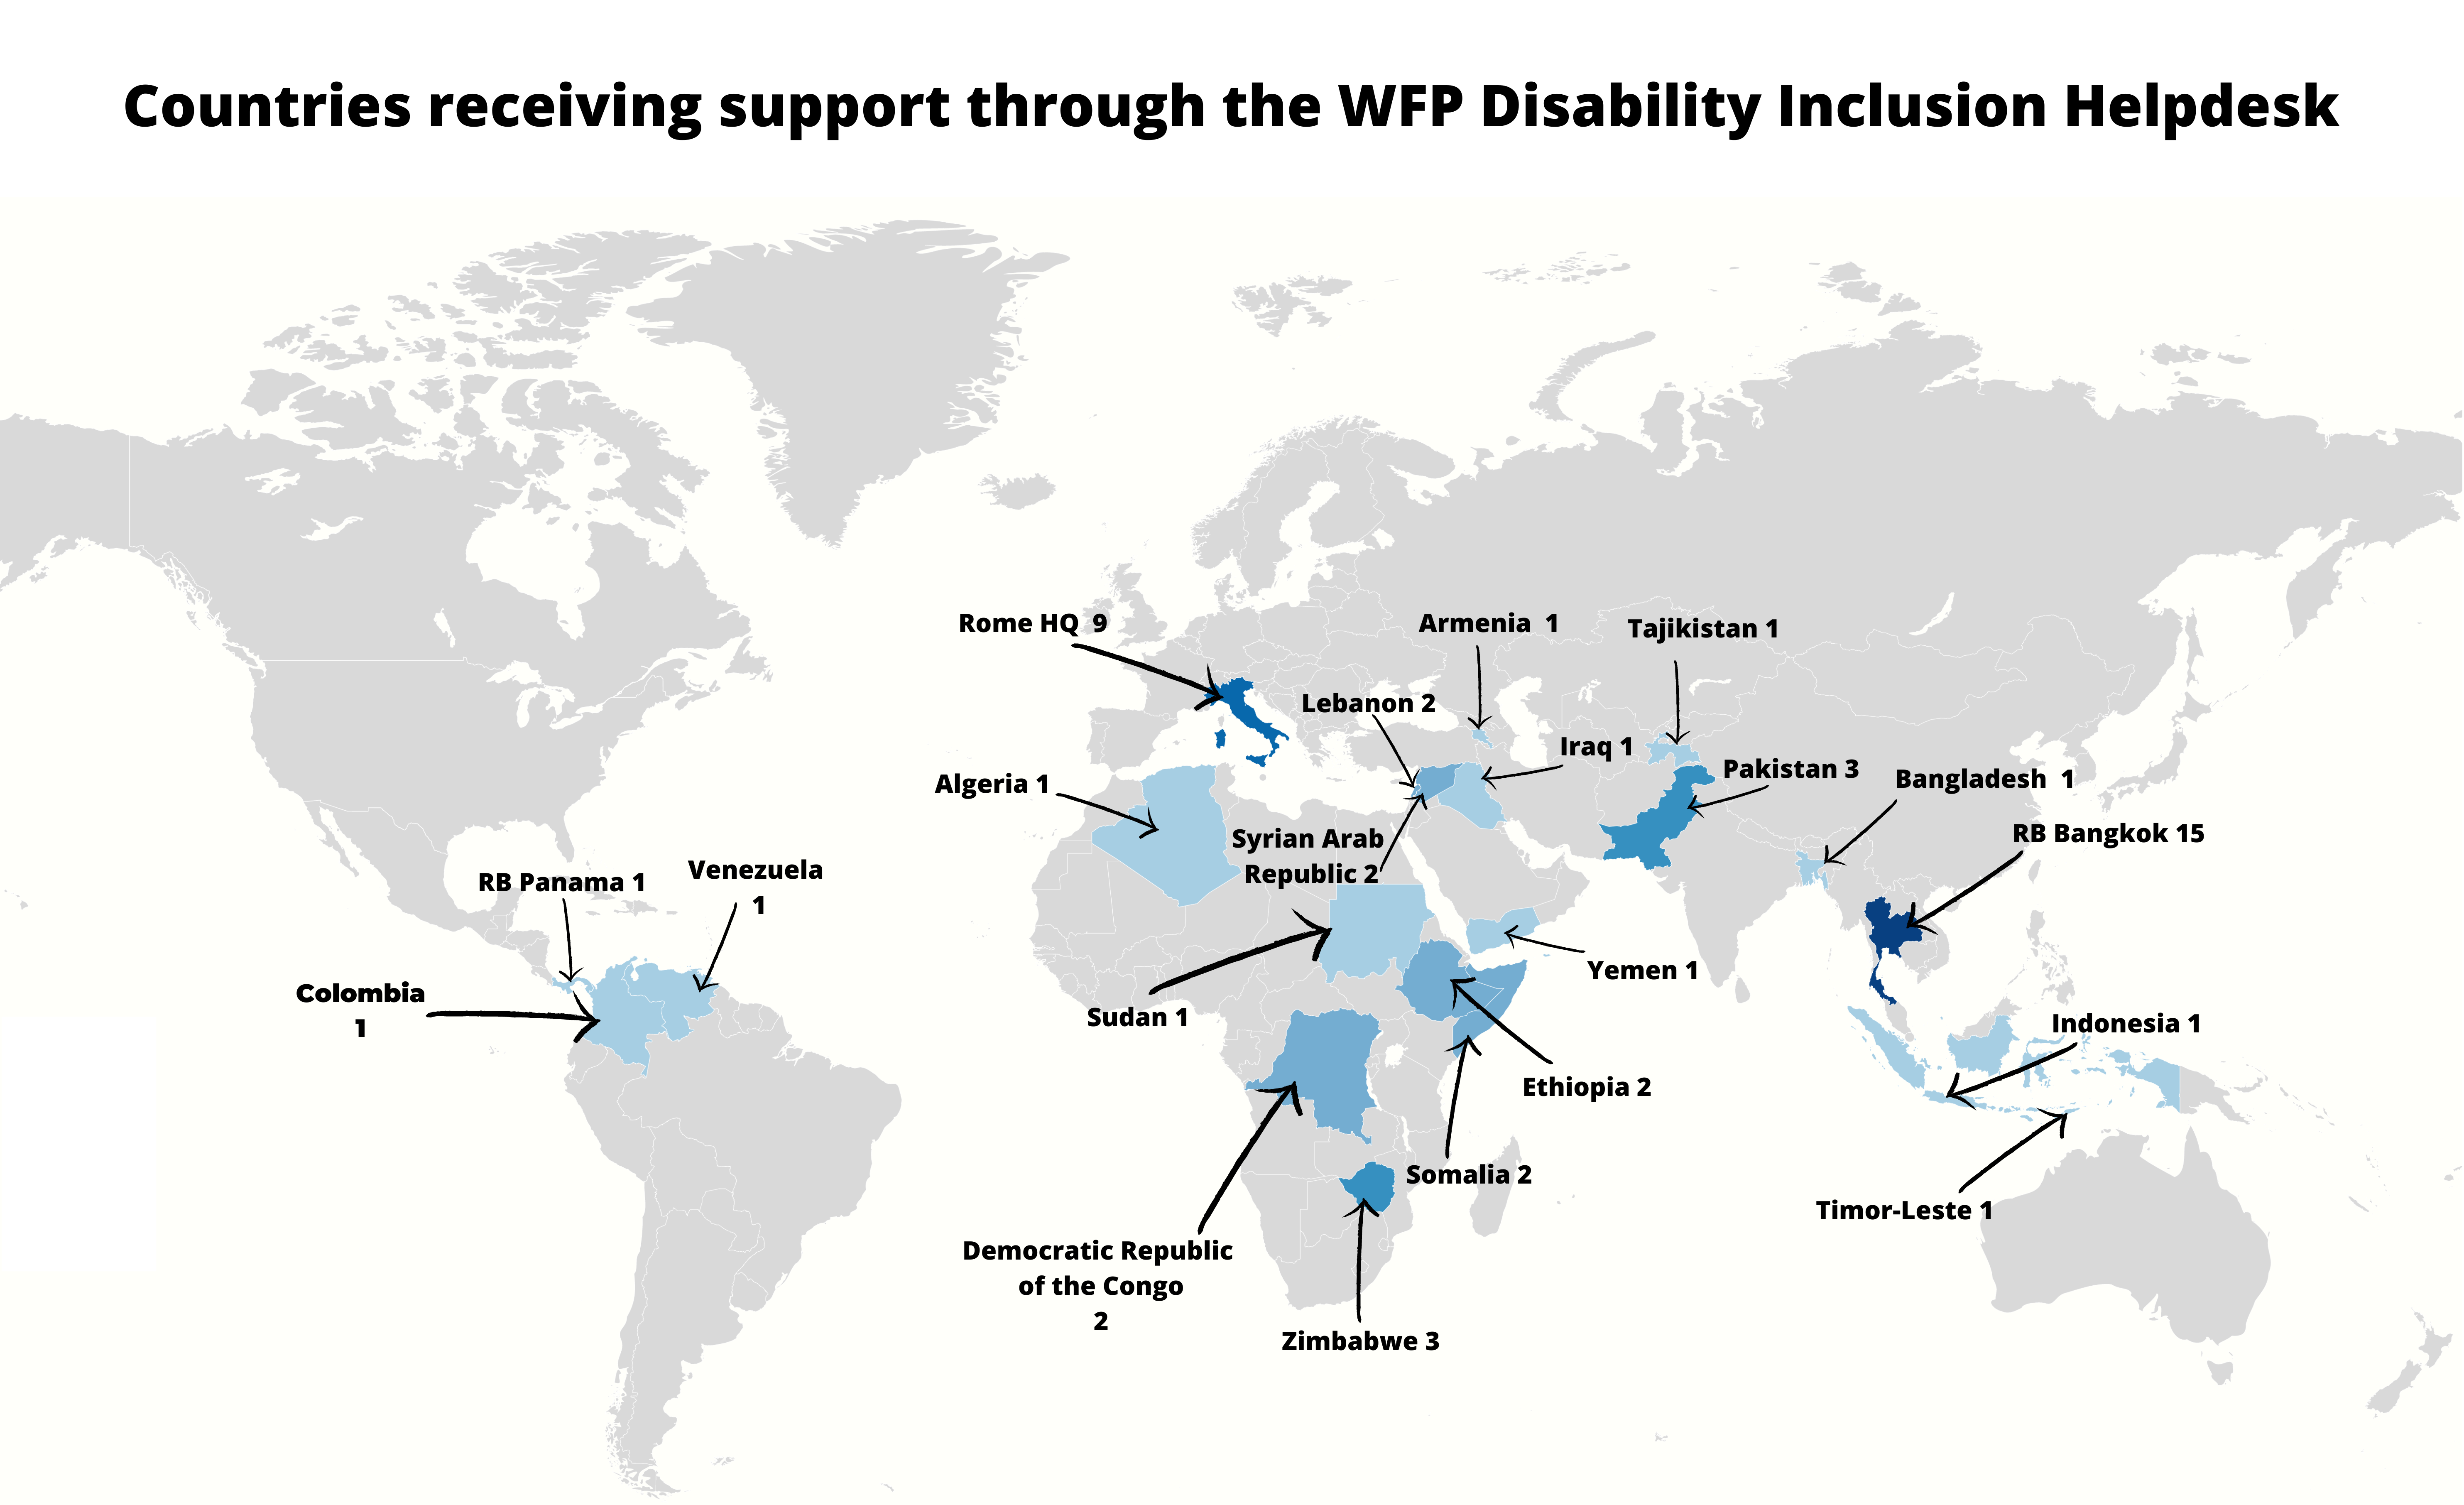 A map showing the countries receiving support through the World Food Programme Disability Inclusion Helpdesk